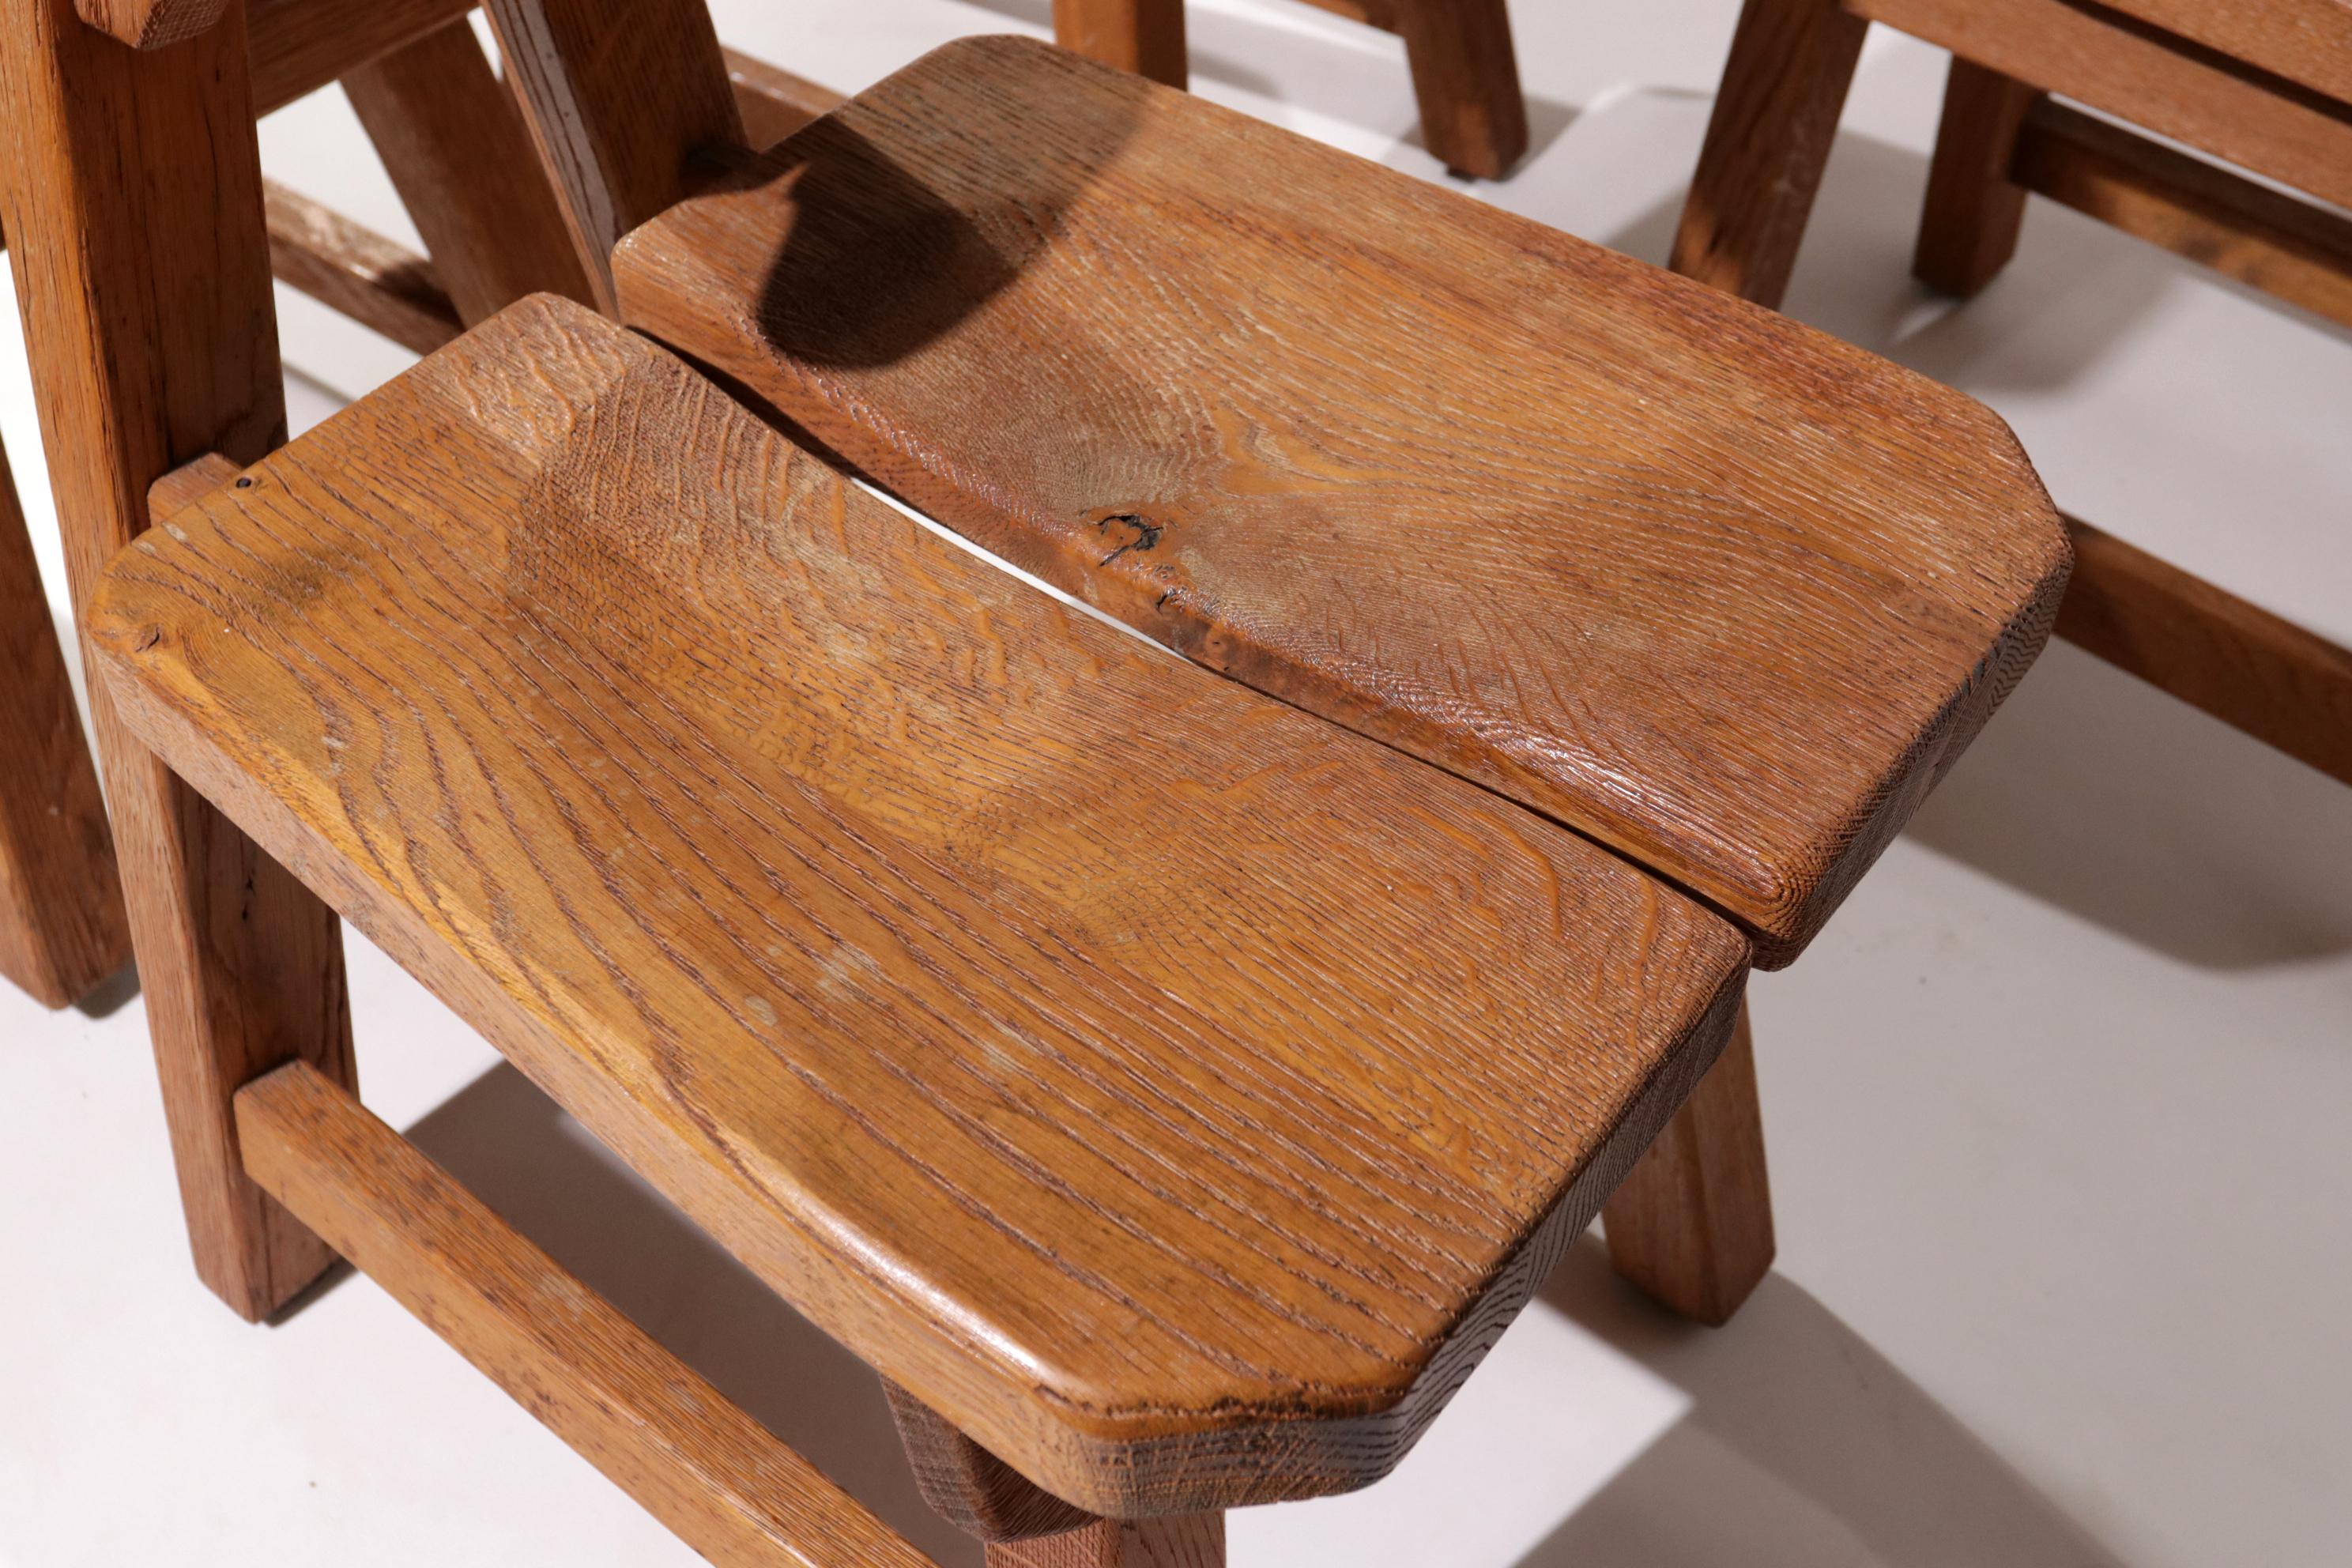 Set of 6 Brutalist Chairs, Solid Oak, Spain, 1970s For Sale 9